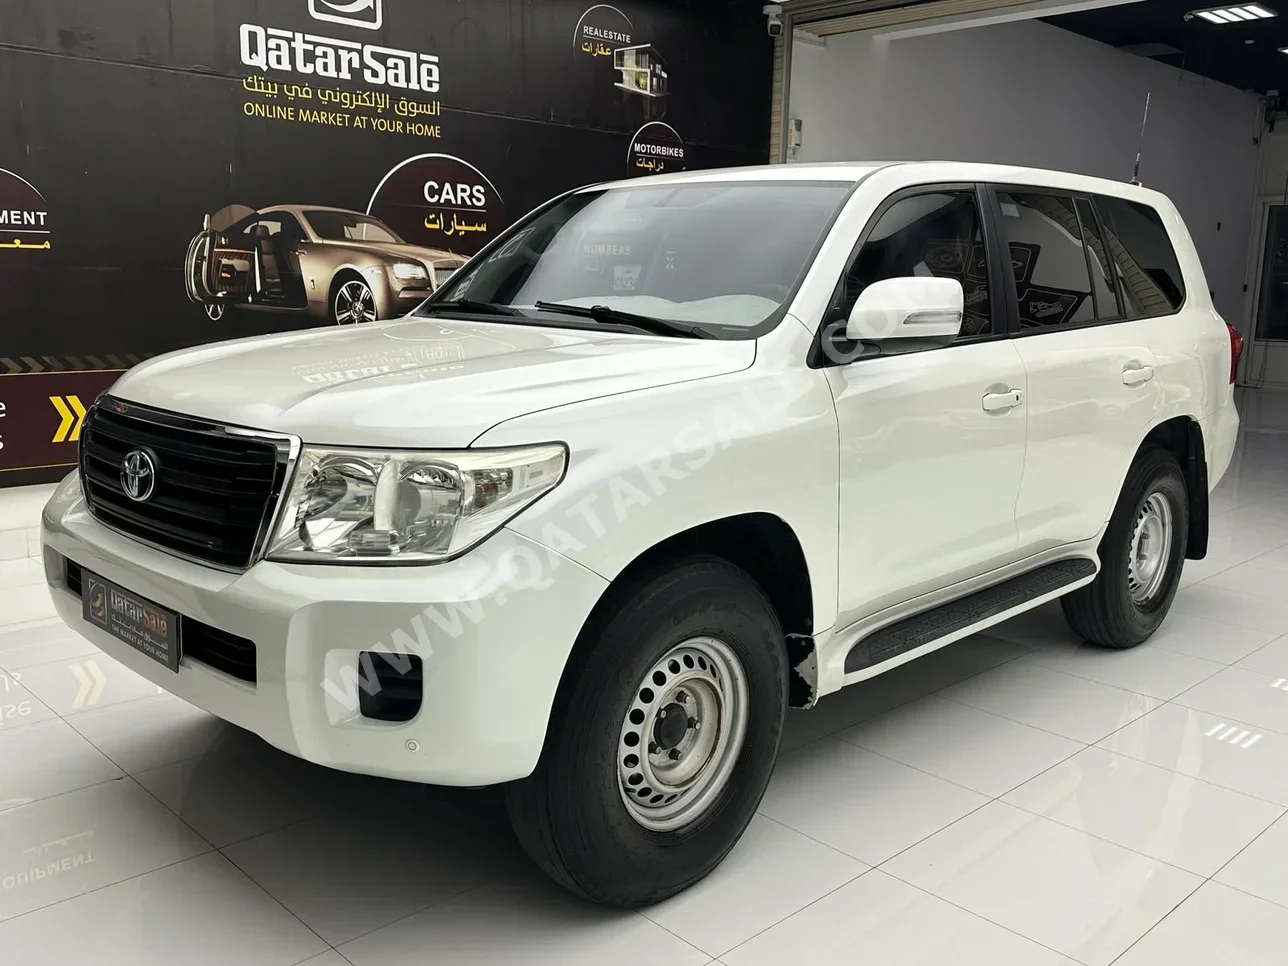 Toyota  Land Cruiser  G  2014  Automatic  360,000 Km  6 Cylinder  Four Wheel Drive (4WD)  SUV  White